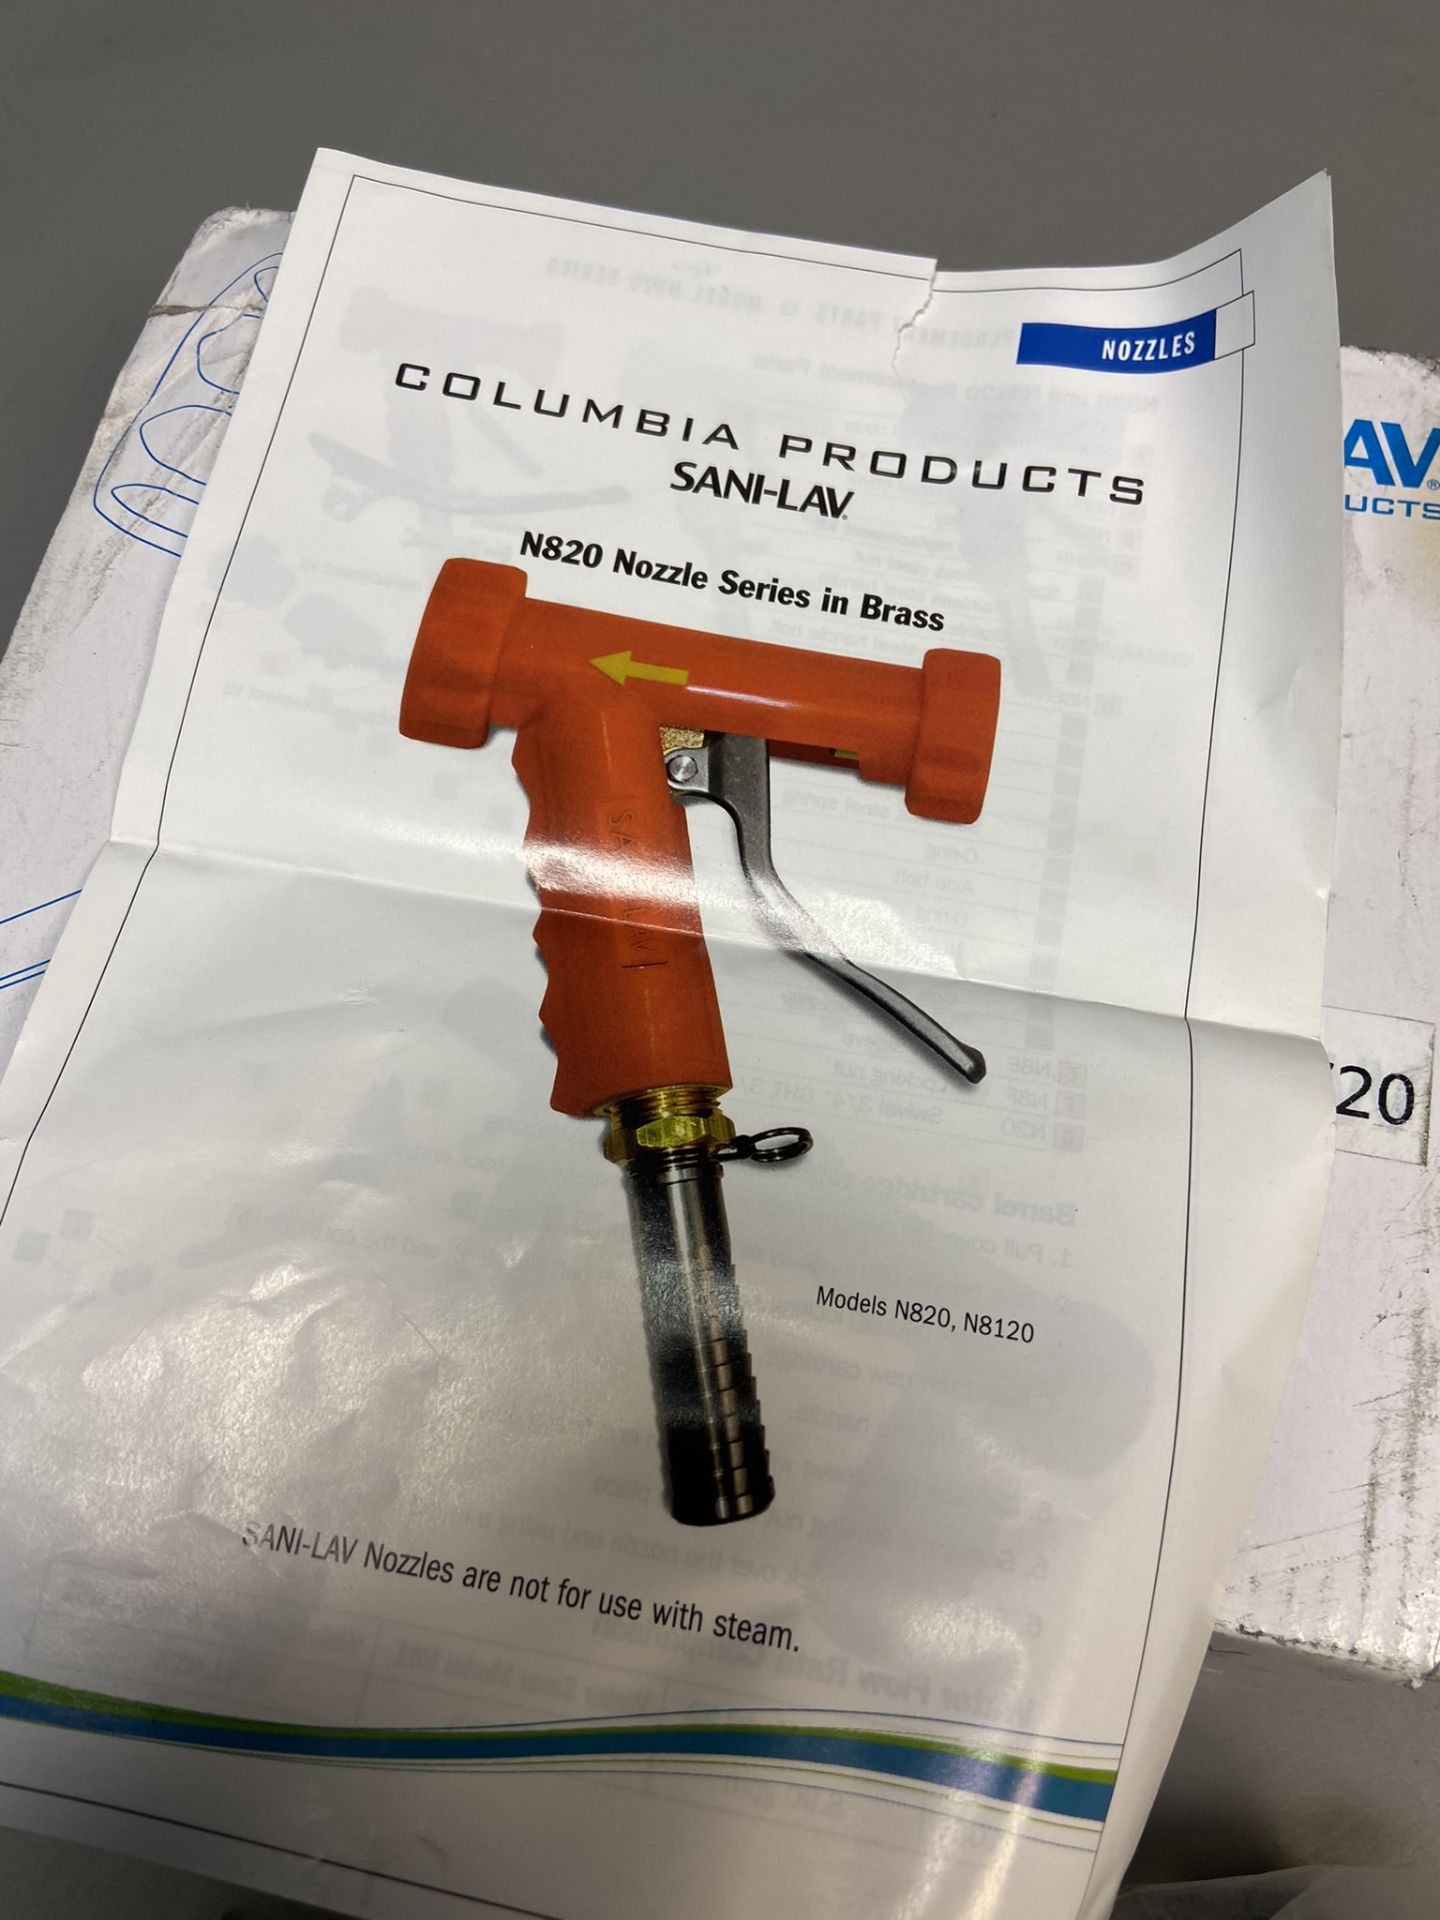 NEW COLUMBIA PRODUCTS SANI-LAV BRASS NOZZLE - Image 3 of 3